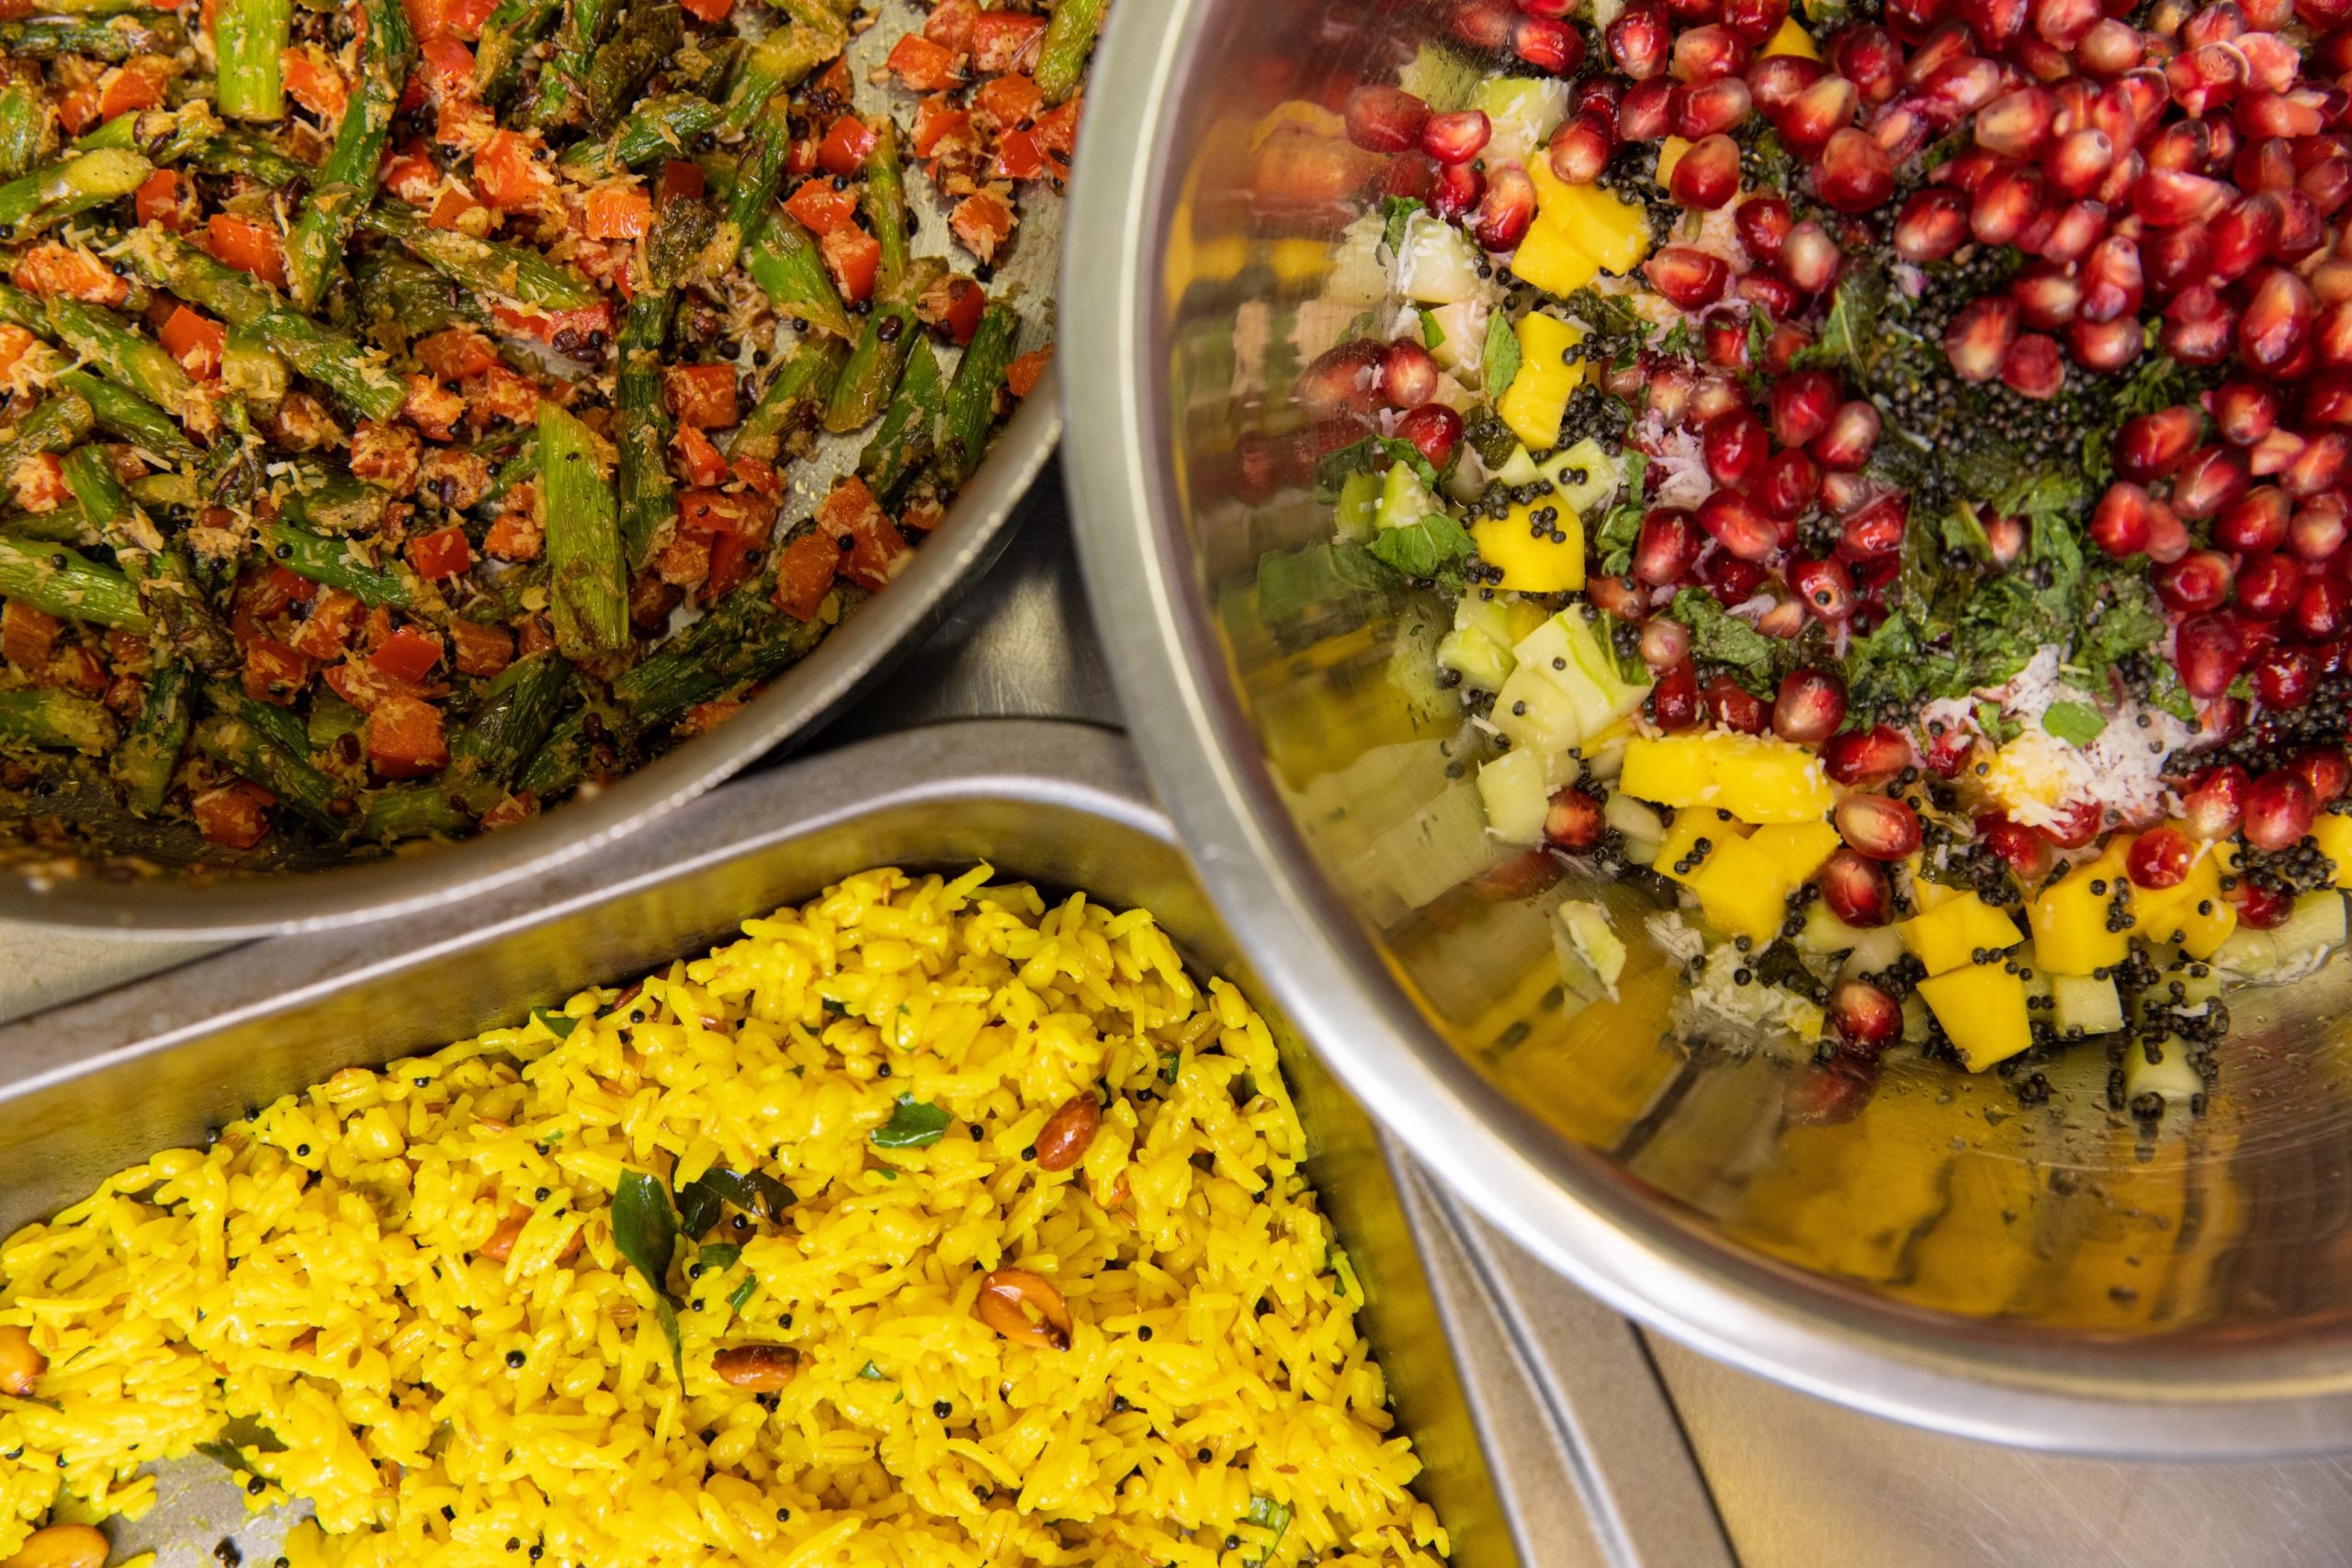 Corey DeRosa uses high quality ingredients to create his Tapovana lunch boxes, which include South Indian recipes that follow Ayurvedic principles of eating.